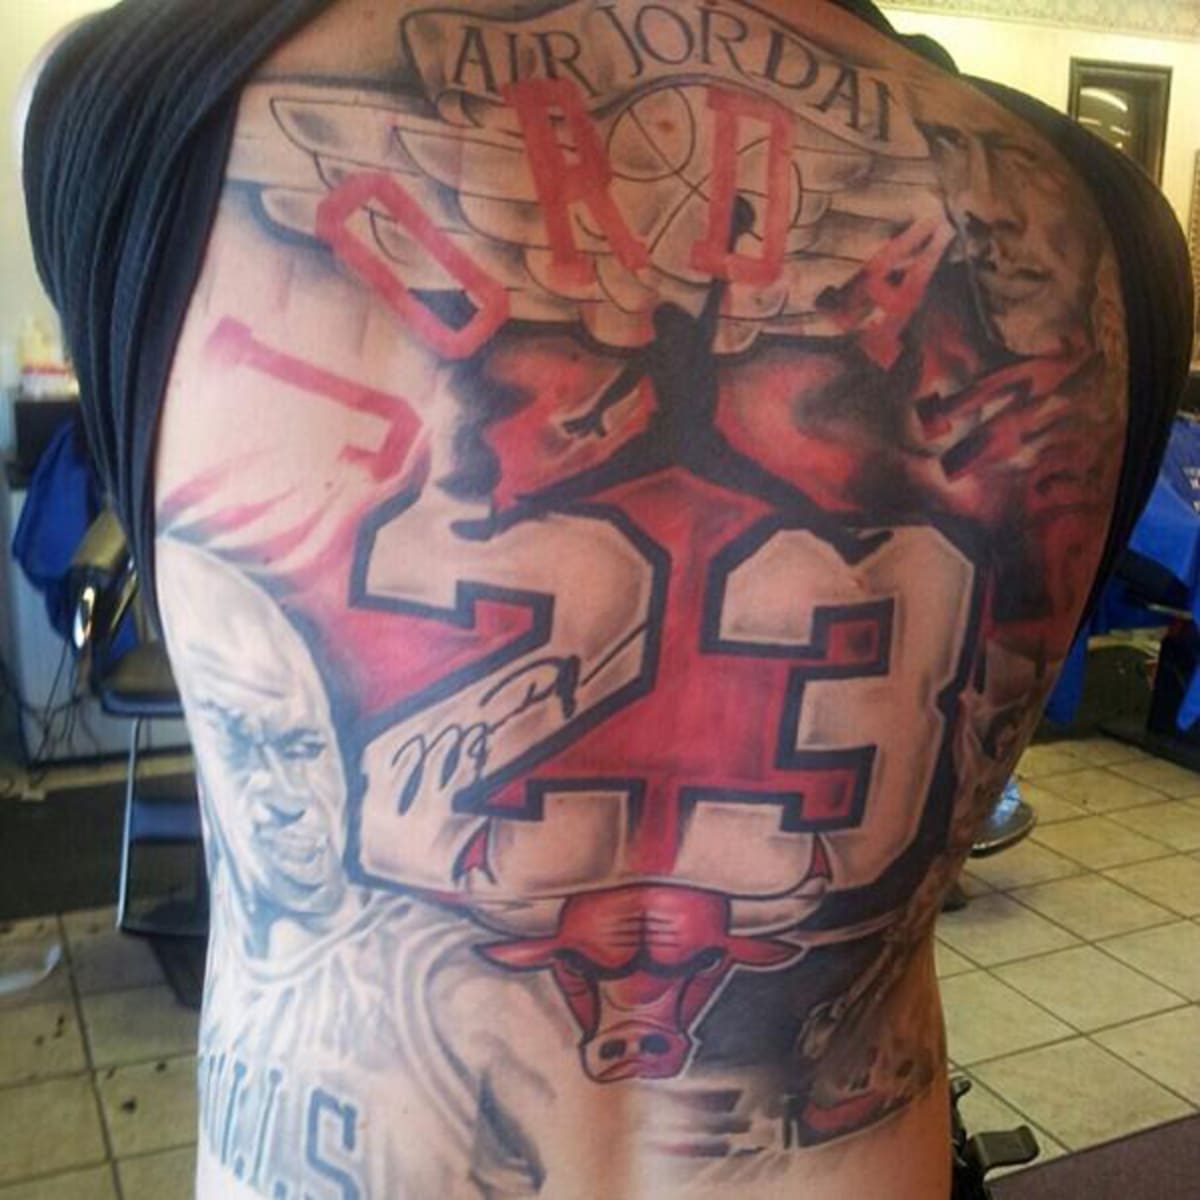 How Many Beers Would It Take To Get A Full Michael Jordan Jersey Tattoo On  Your Back Like This Guy Did? - BroBible